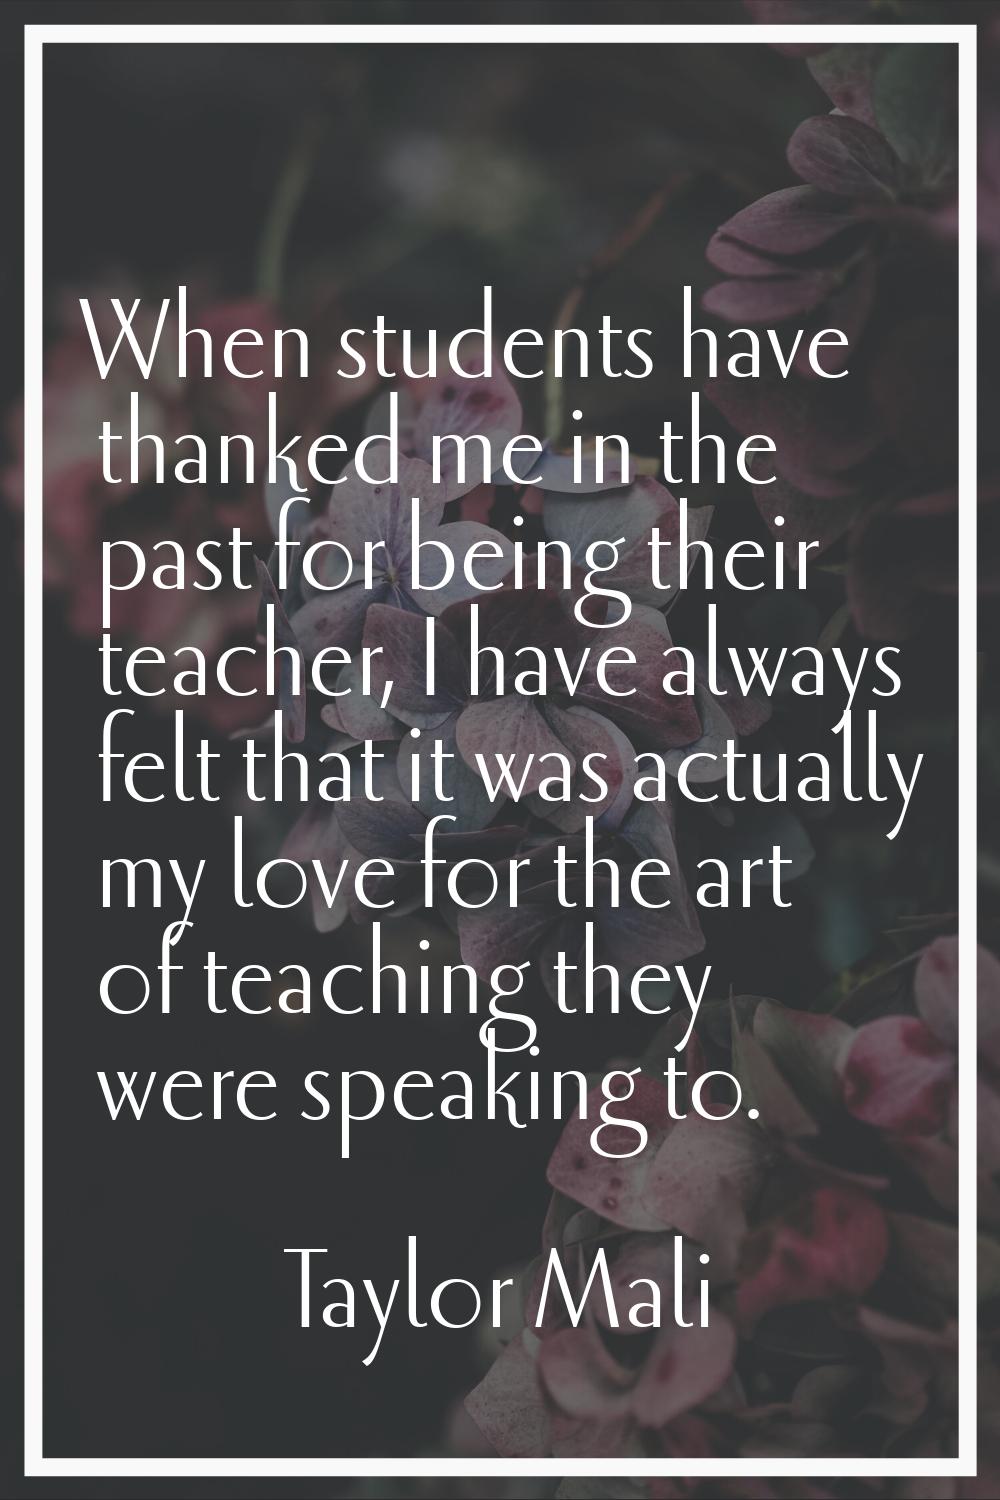 When students have thanked me in the past for being their teacher, I have always felt that it was a